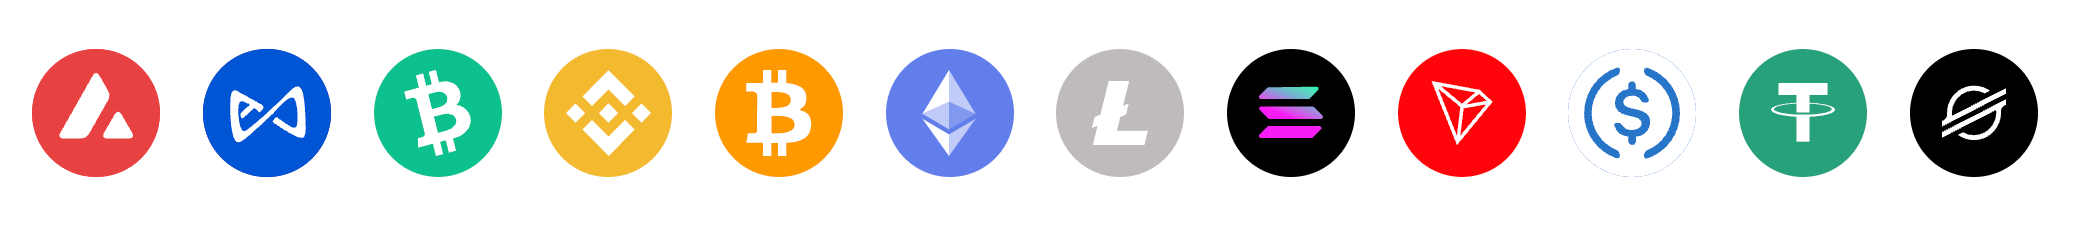 An image of several cryptocurrency logos, such as Bitcoin, Bitcoin Cash, and Ethereum.